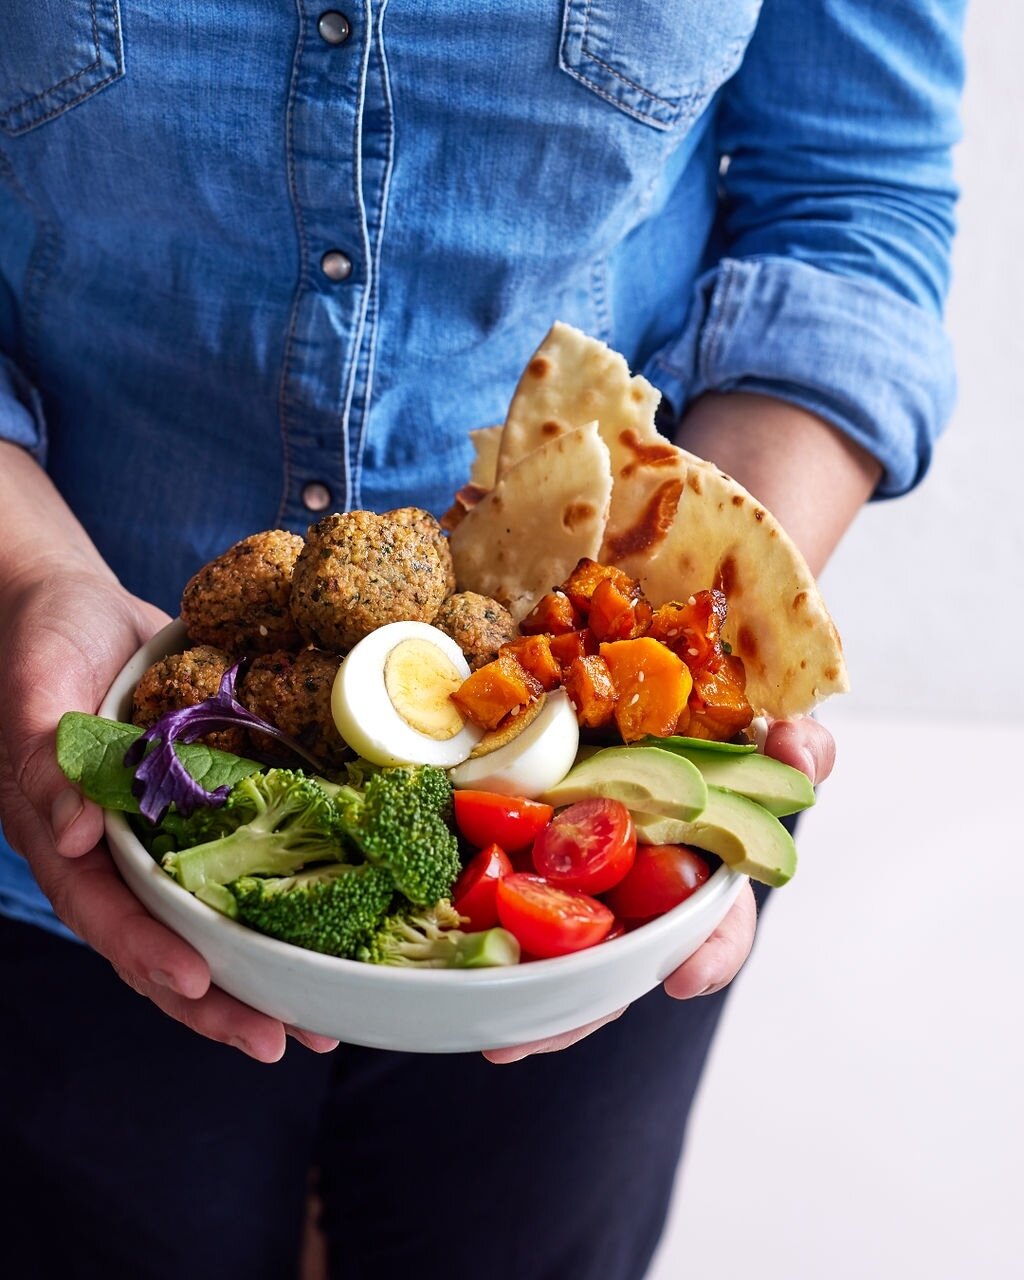 Whats in your Falafel Buddha bowl? (other than Falafel obviously 🤪)⁠
⁠
Arabian Bites Falafel Mixes are a great pantry stable to have you whipping up a healthy, delicious meal in minutes.⁠
⁠
Stock the pantry with ⁠🚚 Free shipping for all orders over